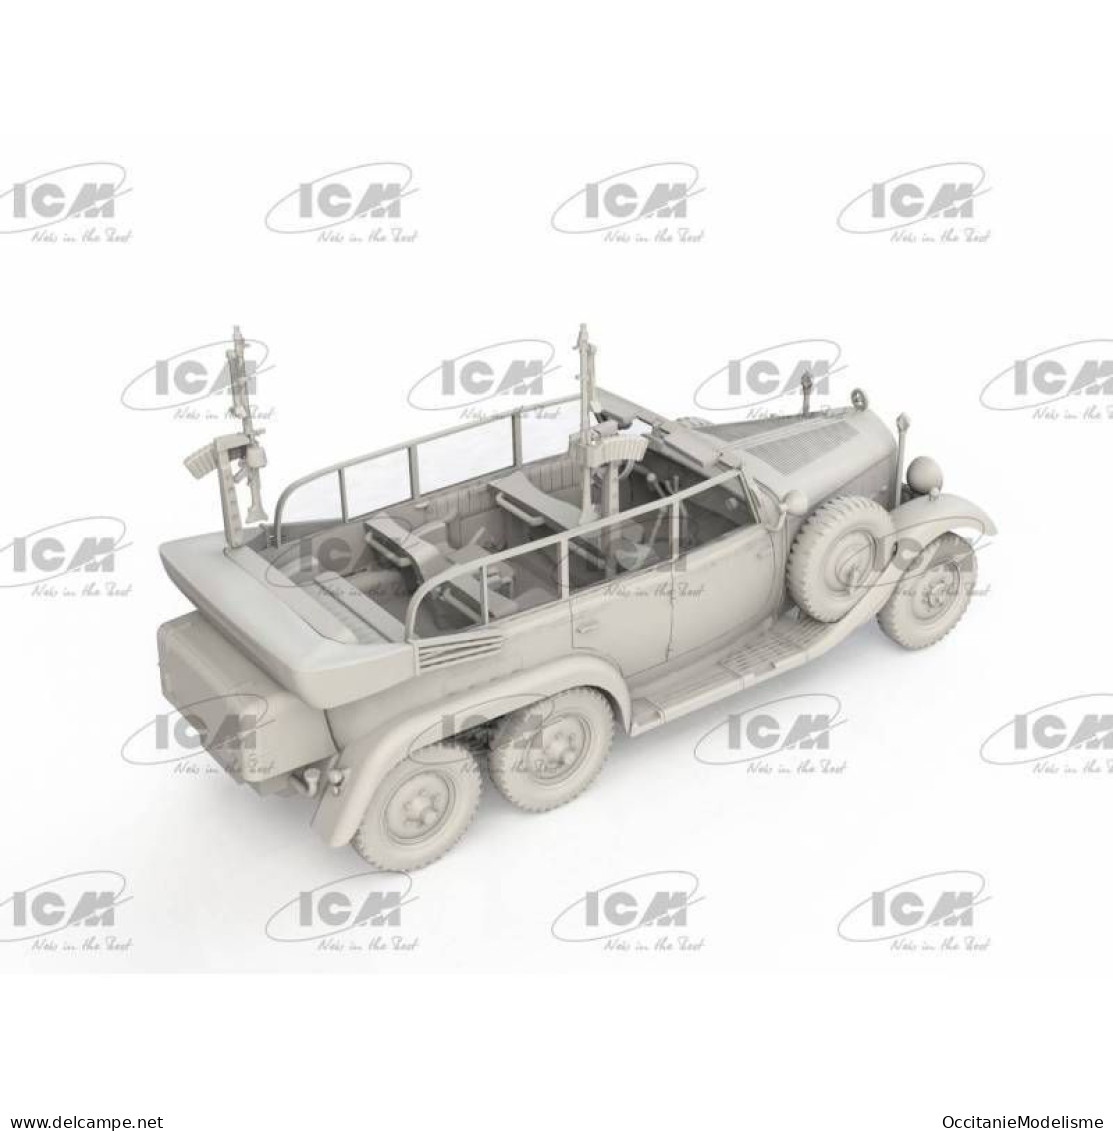 ICM - MERCEDES-BENZ TYPE G4 Partisanenwagen MG34 WWII Maquette Kit Plastique Réf. 72473 Neuf NBO 1/72 - Military Vehicles